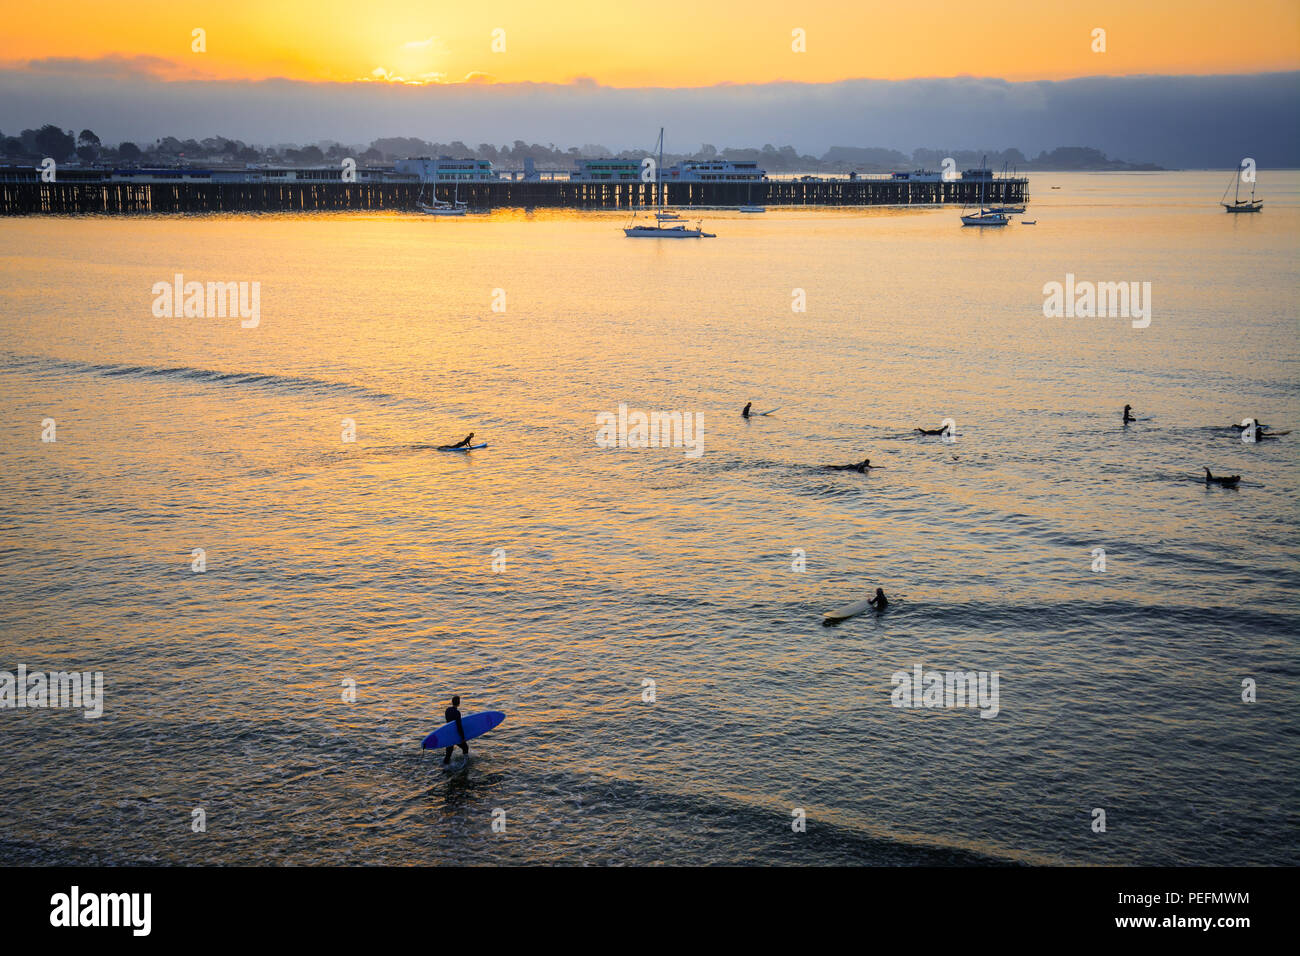 Surfers starting the morning early as they practice riding waves on the Santa Cruz shoreline. Stock Photo